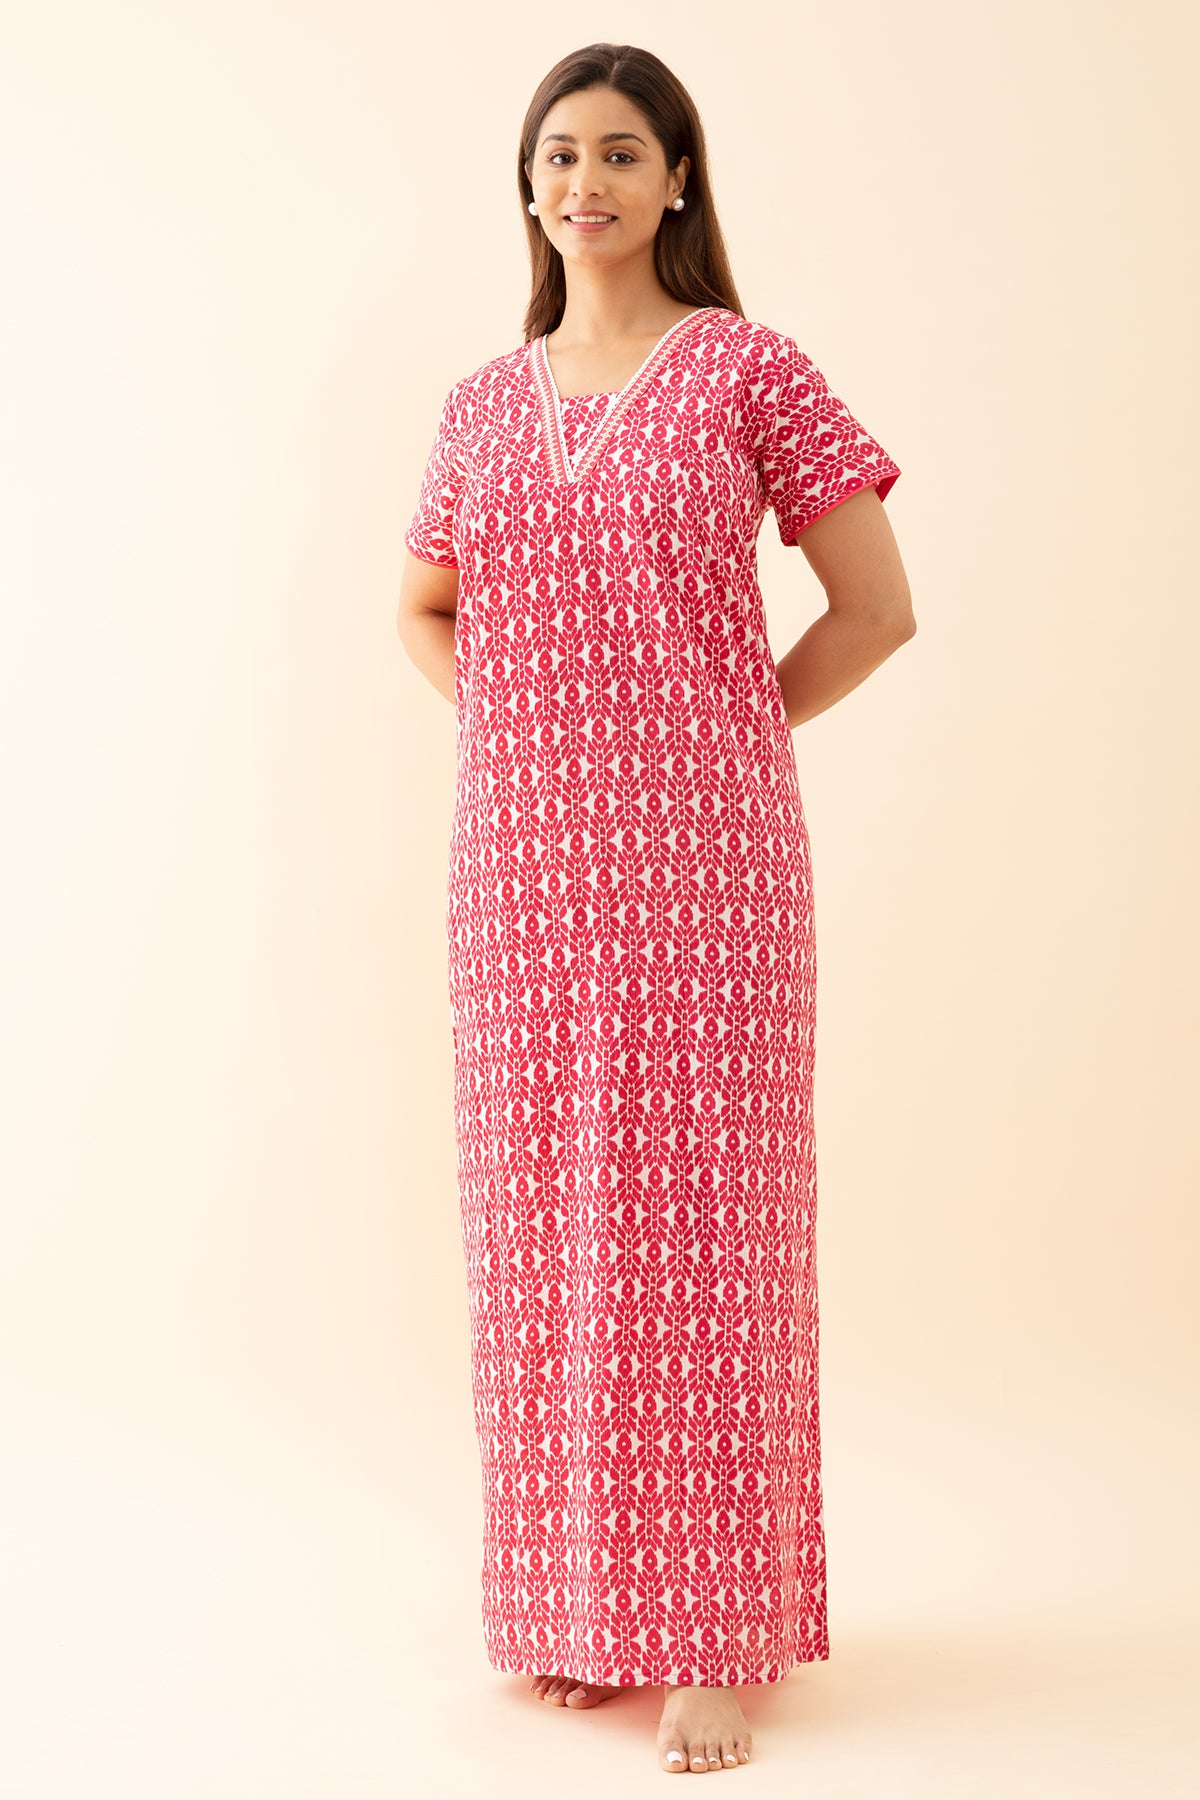 Geometric Printed Nighty with Lace Embellished Neckline - Pink